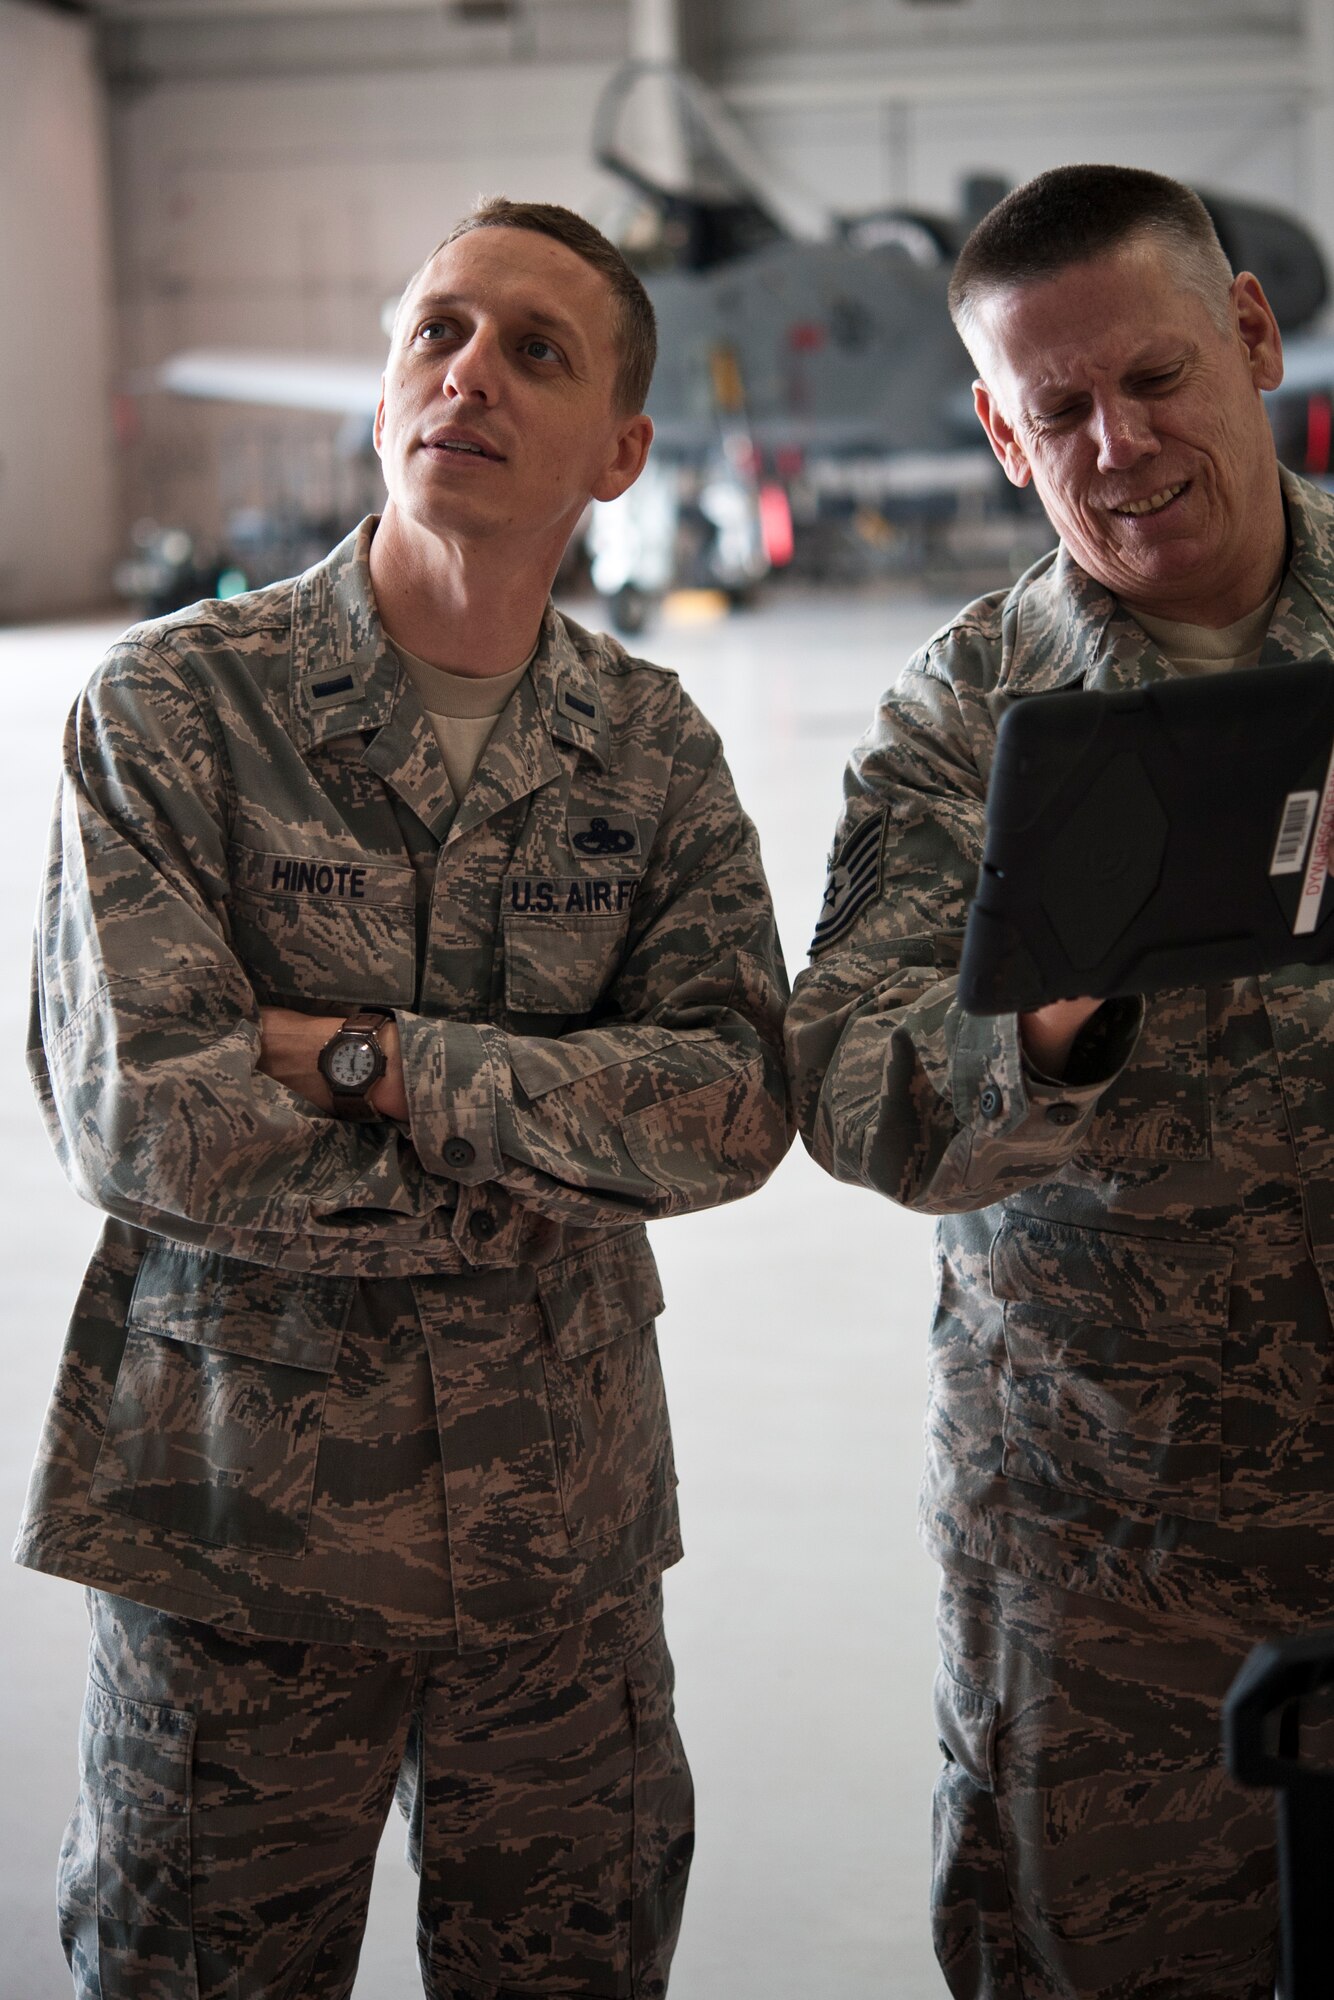 1st Lt. Chris Hinote, 442nd Aircraft Maintenance Squadron officer, goes over tasking orders with Tech. Sgt. Dave Ward, 717th Aircraft Maintenance Squadron electro-environmental technician, May 14, 2014, at Whiteman Air Force Base, Missouri. Hinote was the Company Grade Officer of the Quarter for the first quarter of 2014. (U.S. Air Force photo by Senior Airman Daniel Phelps/Released)